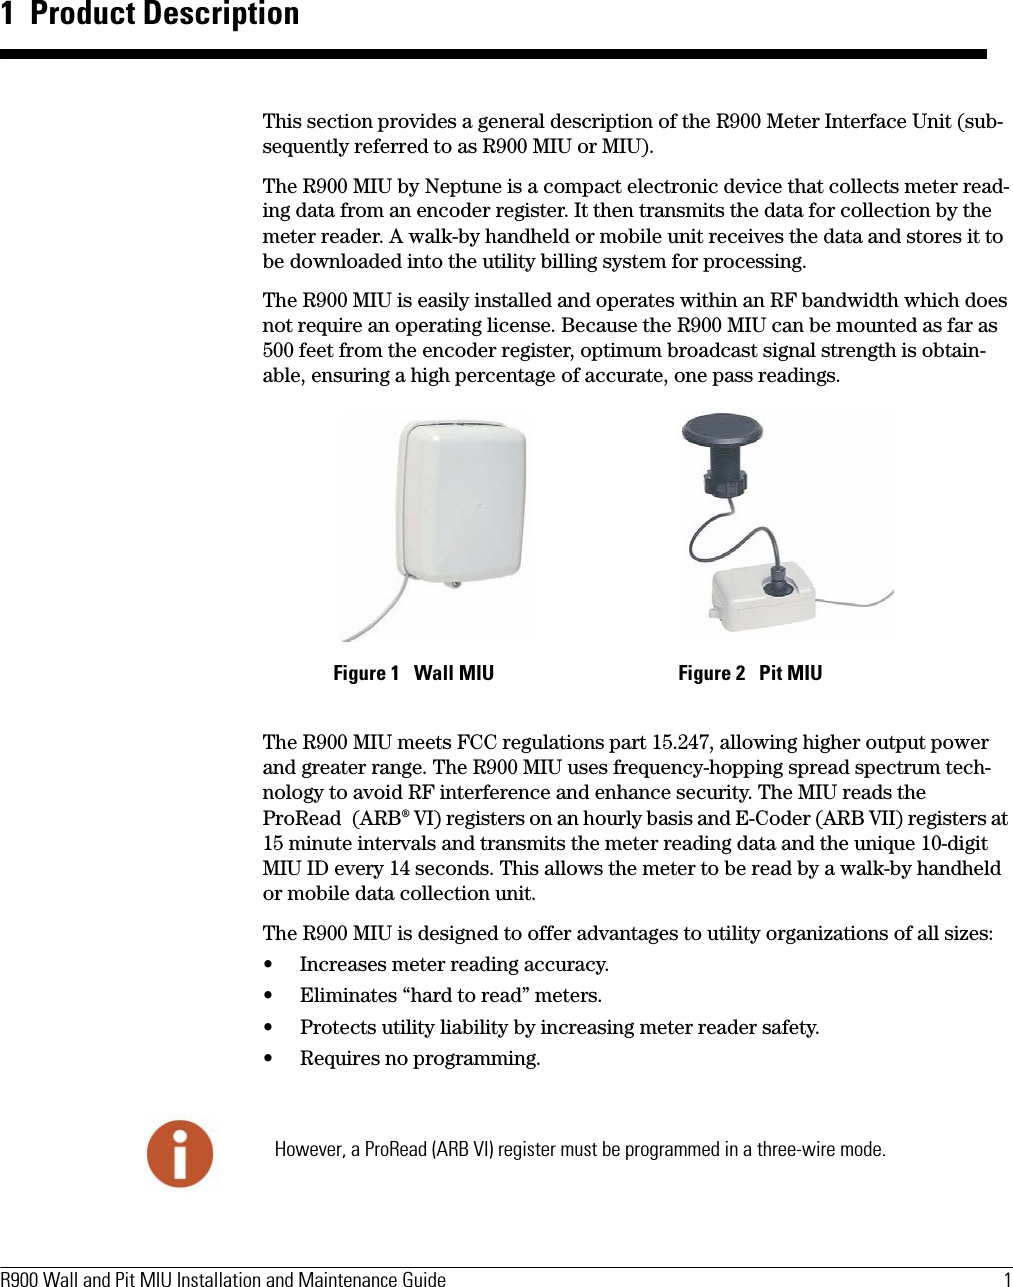 R900 Wall and Pit MIU Installation and Maintenance Guide  1 1  Product DescriptionThis section provides a general description of the R900 Meter Interface Unit (sub-sequently referred to as R900 MIU or MIU).The R900 MIU by Neptune is a compact electronic device that collects meter read-ing data from an encoder register. It then transmits the data for collection by the meter reader. A walk-by handheld or mobile unit receives the data and stores it to be downloaded into the utility billing system for processing.The R900 MIU is easily installed and operates within an RF bandwidth which does not require an operating license. Because the R900 MIU can be mounted as far as 500 feet from the encoder register, optimum broadcast signal strength is obtain-able, ensuring a high percentage of accurate, one pass readings.The R900 MIU meets FCC regulations part 15.247, allowing higher output power and greater range. The R900 MIU uses frequency-hopping spread spectrum tech-nology to avoid RF interference and enhance security. The MIU reads the ProRead (ARB® VI) registers on an hourly basis and E-Coder (ARB VII) registers at 15 minute intervals and transmits the meter reading data and the unique 10-digit MIU ID every 14 seconds. This allows the meter to be read by a walk-by handheld or mobile data collection unit.The R900 MIU is designed to offer advantages to utility organizations of all sizes:• Increases meter reading accuracy.• Eliminates “hard to read” meters.• Protects utility liability by increasing meter reader safety.• Requires no programming.  Figure 1   Wall MIU Figure 2   Pit MIUHowever, a ProRead (ARB VI) register must be programmed in a three-wire mode.